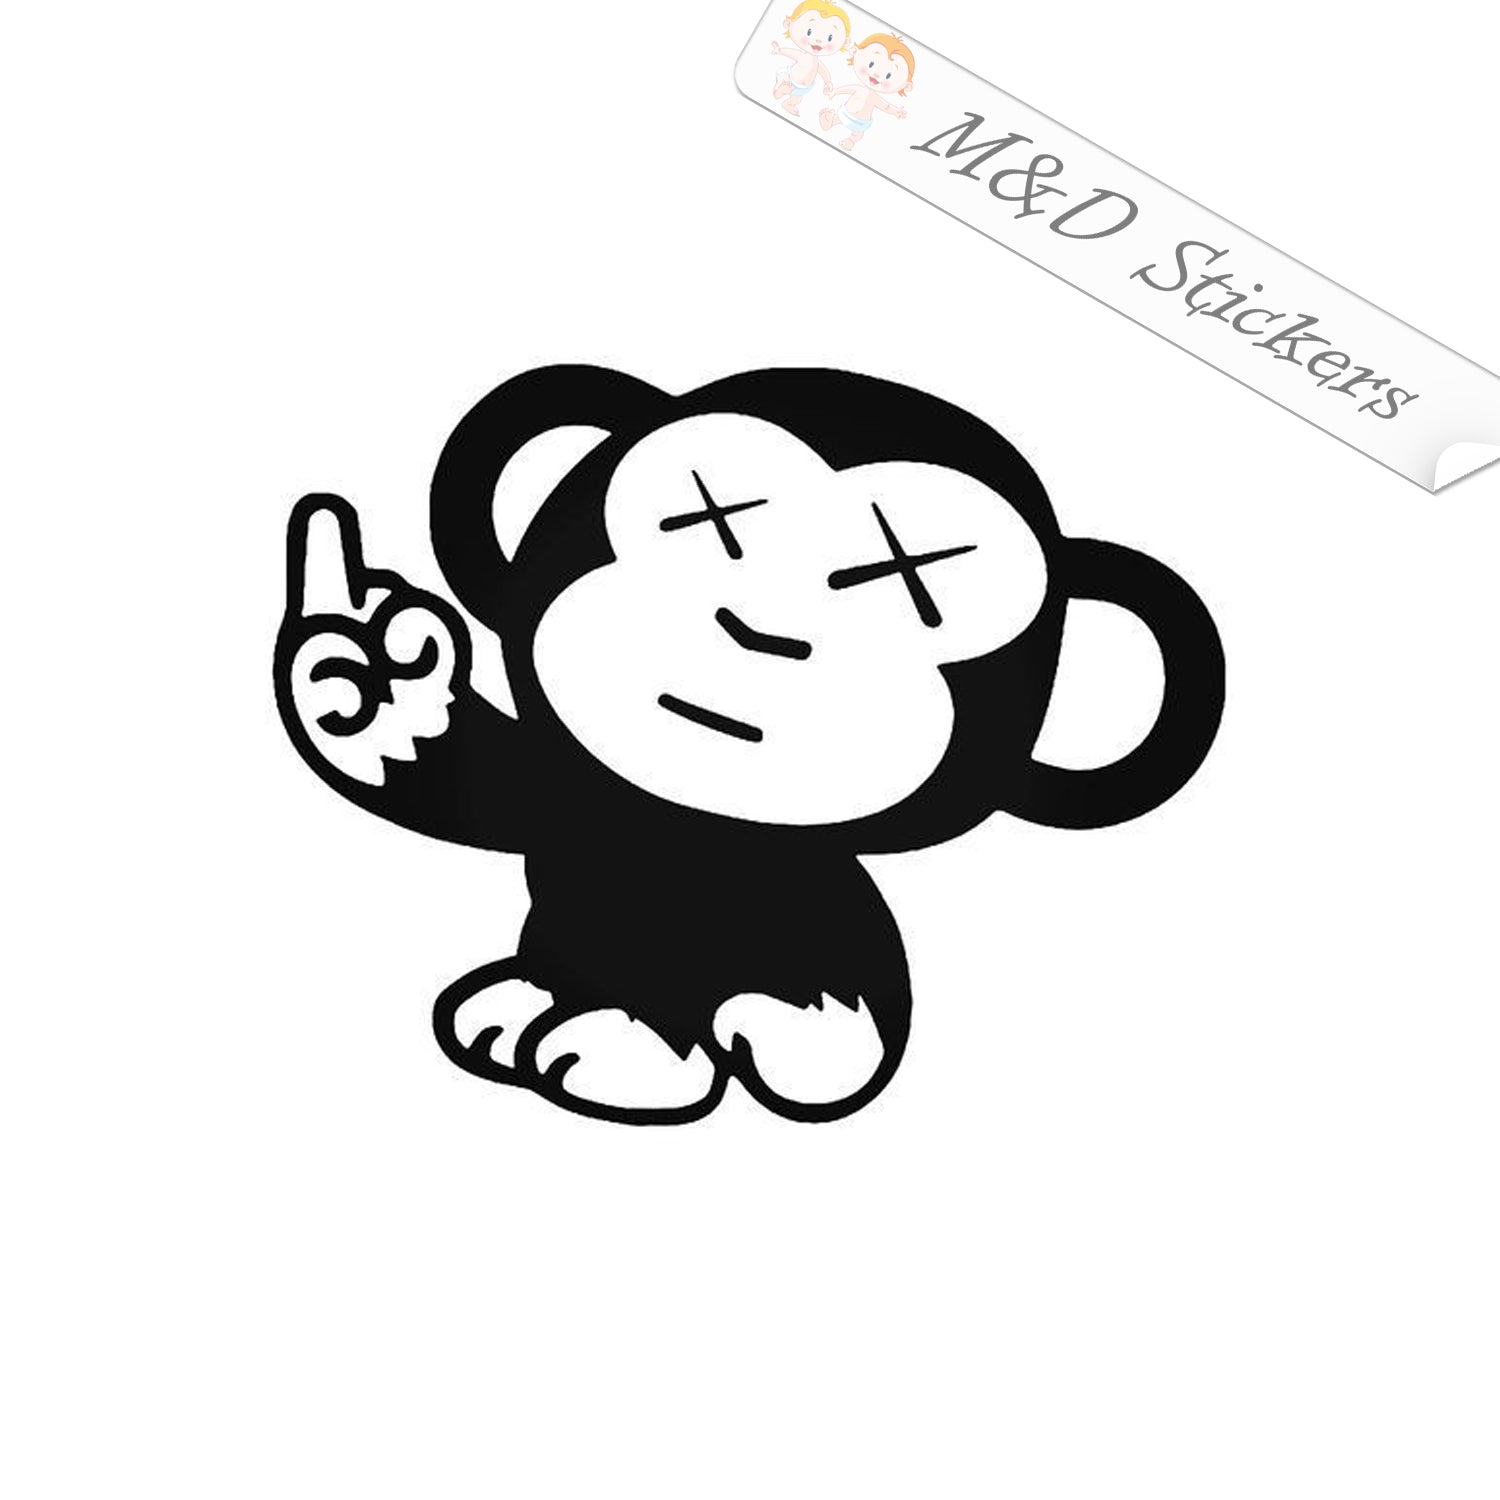 2x Bad Monkey Flipping The Bird Vinyl Decal Sticker Different colors & size  for Cars/Bikes/Windows